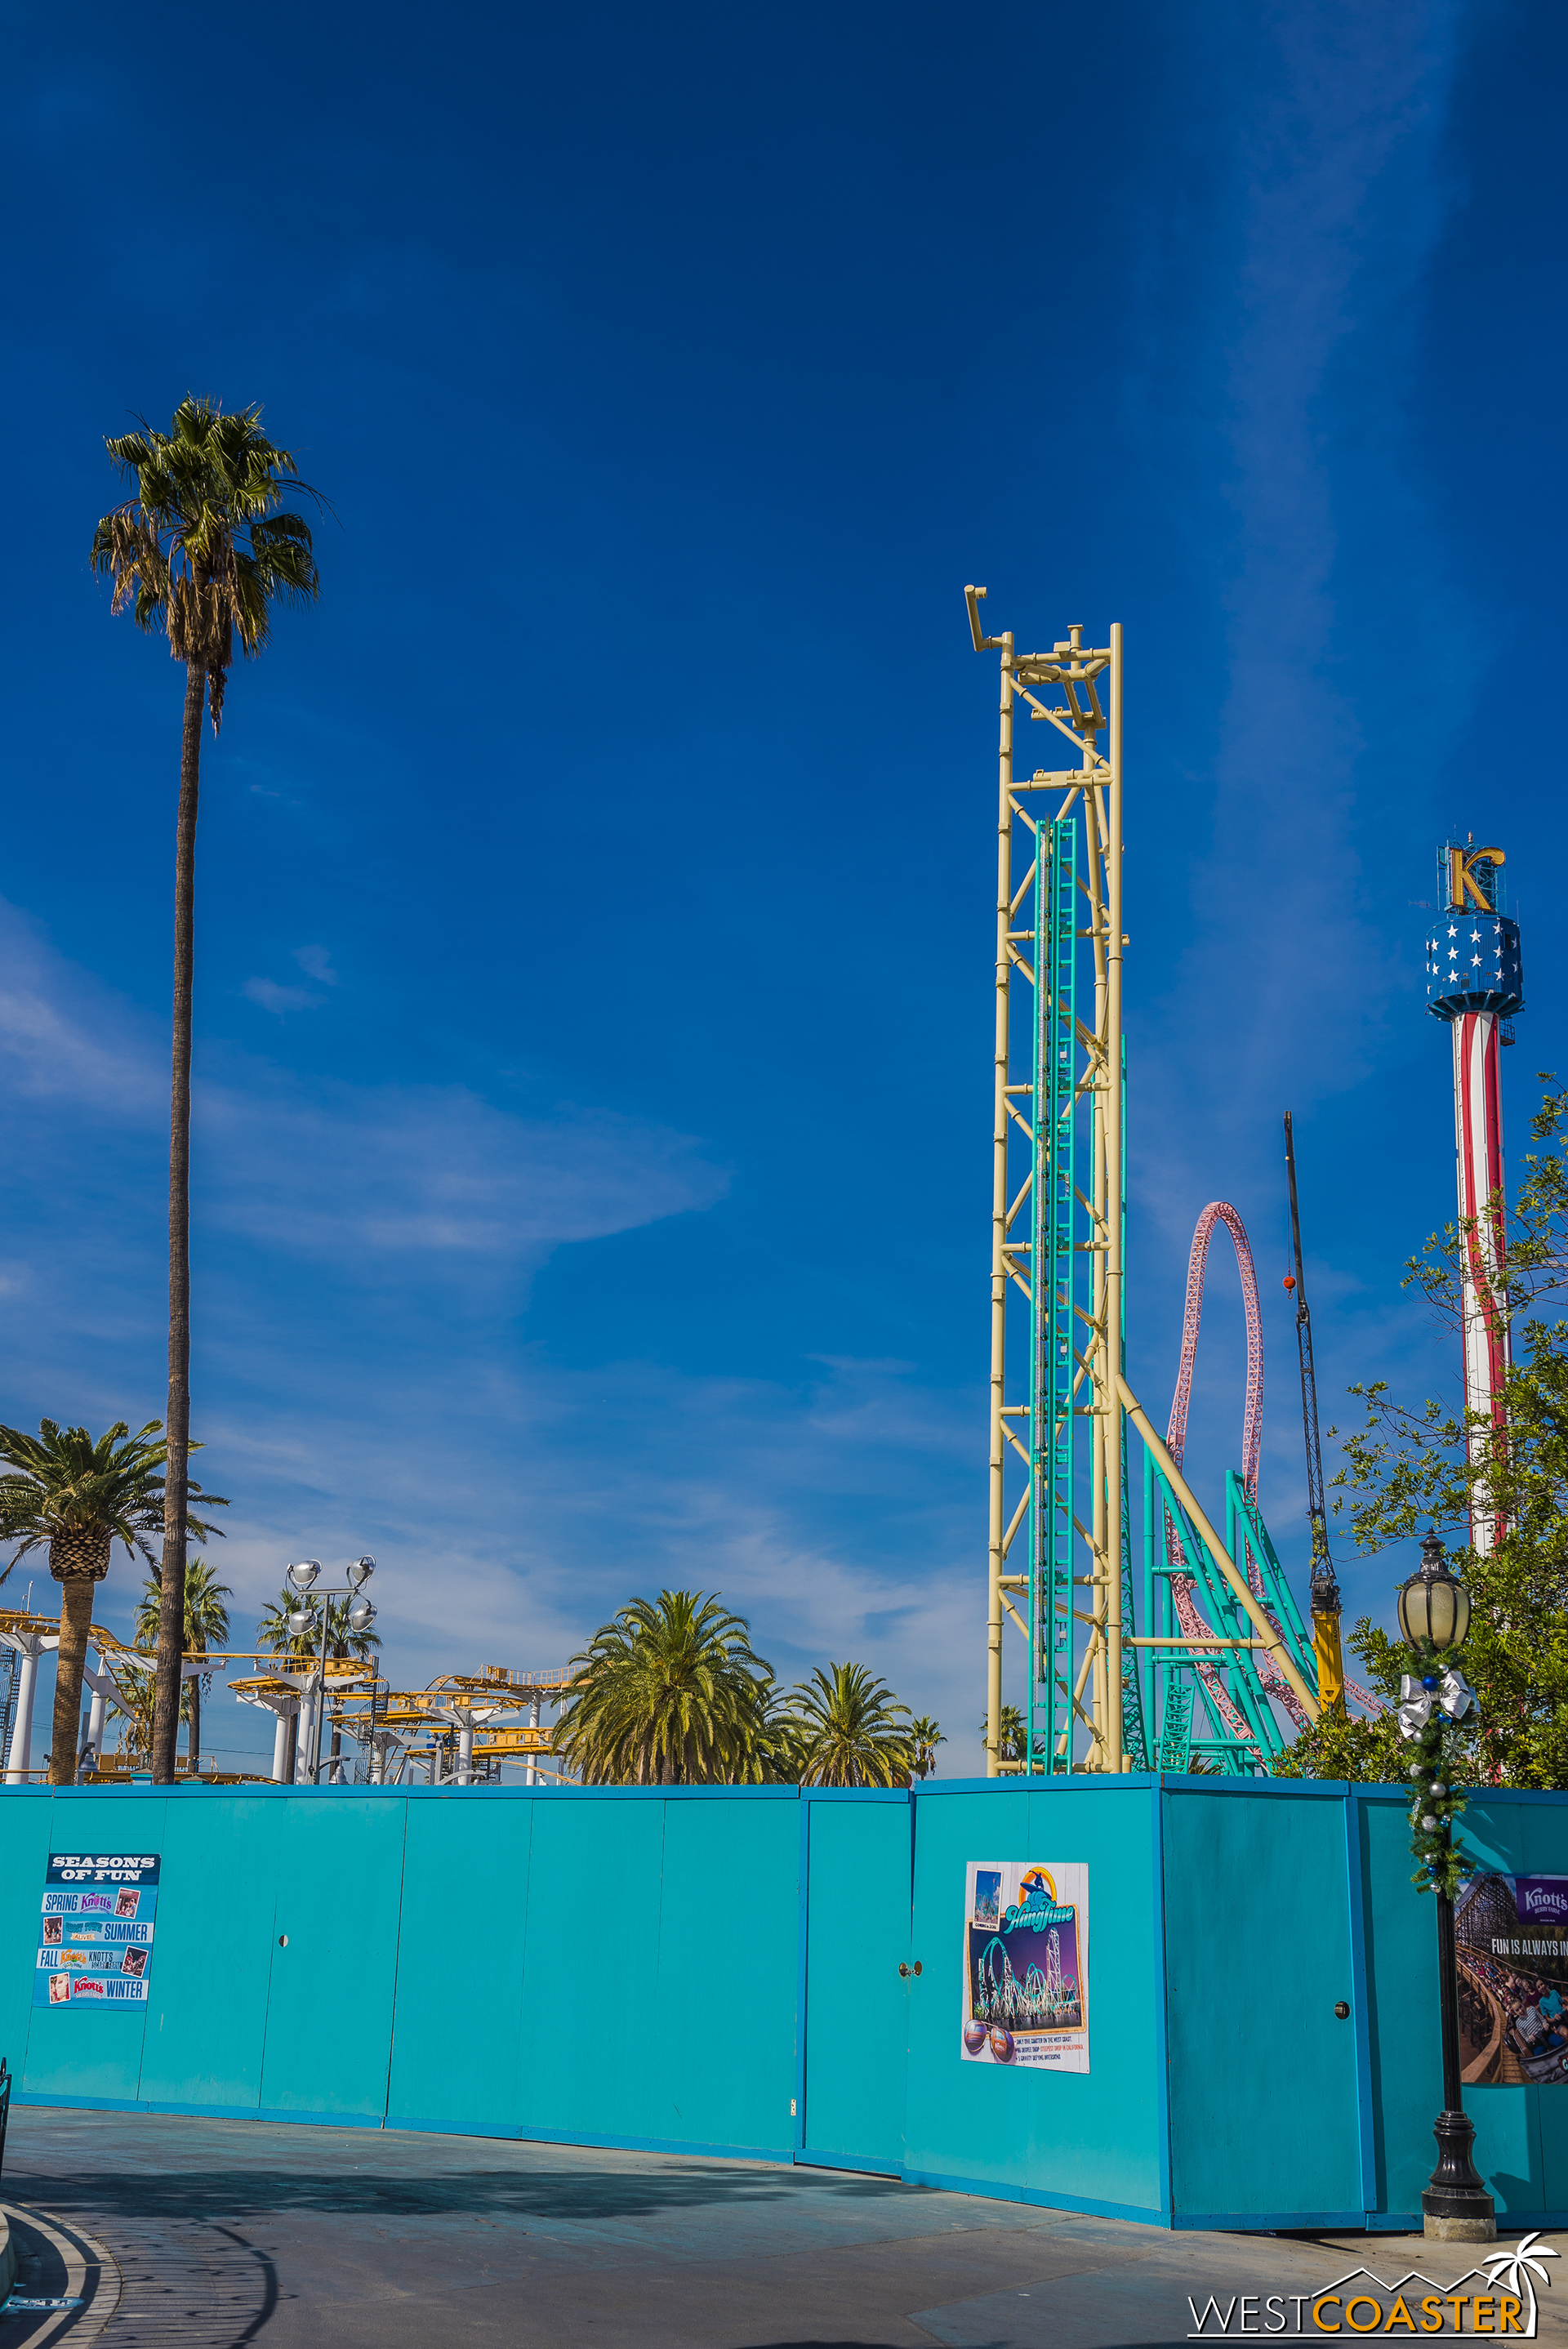  Dayam, there's a pretty tall erection coming out of the Boardwalk at Knott's! 